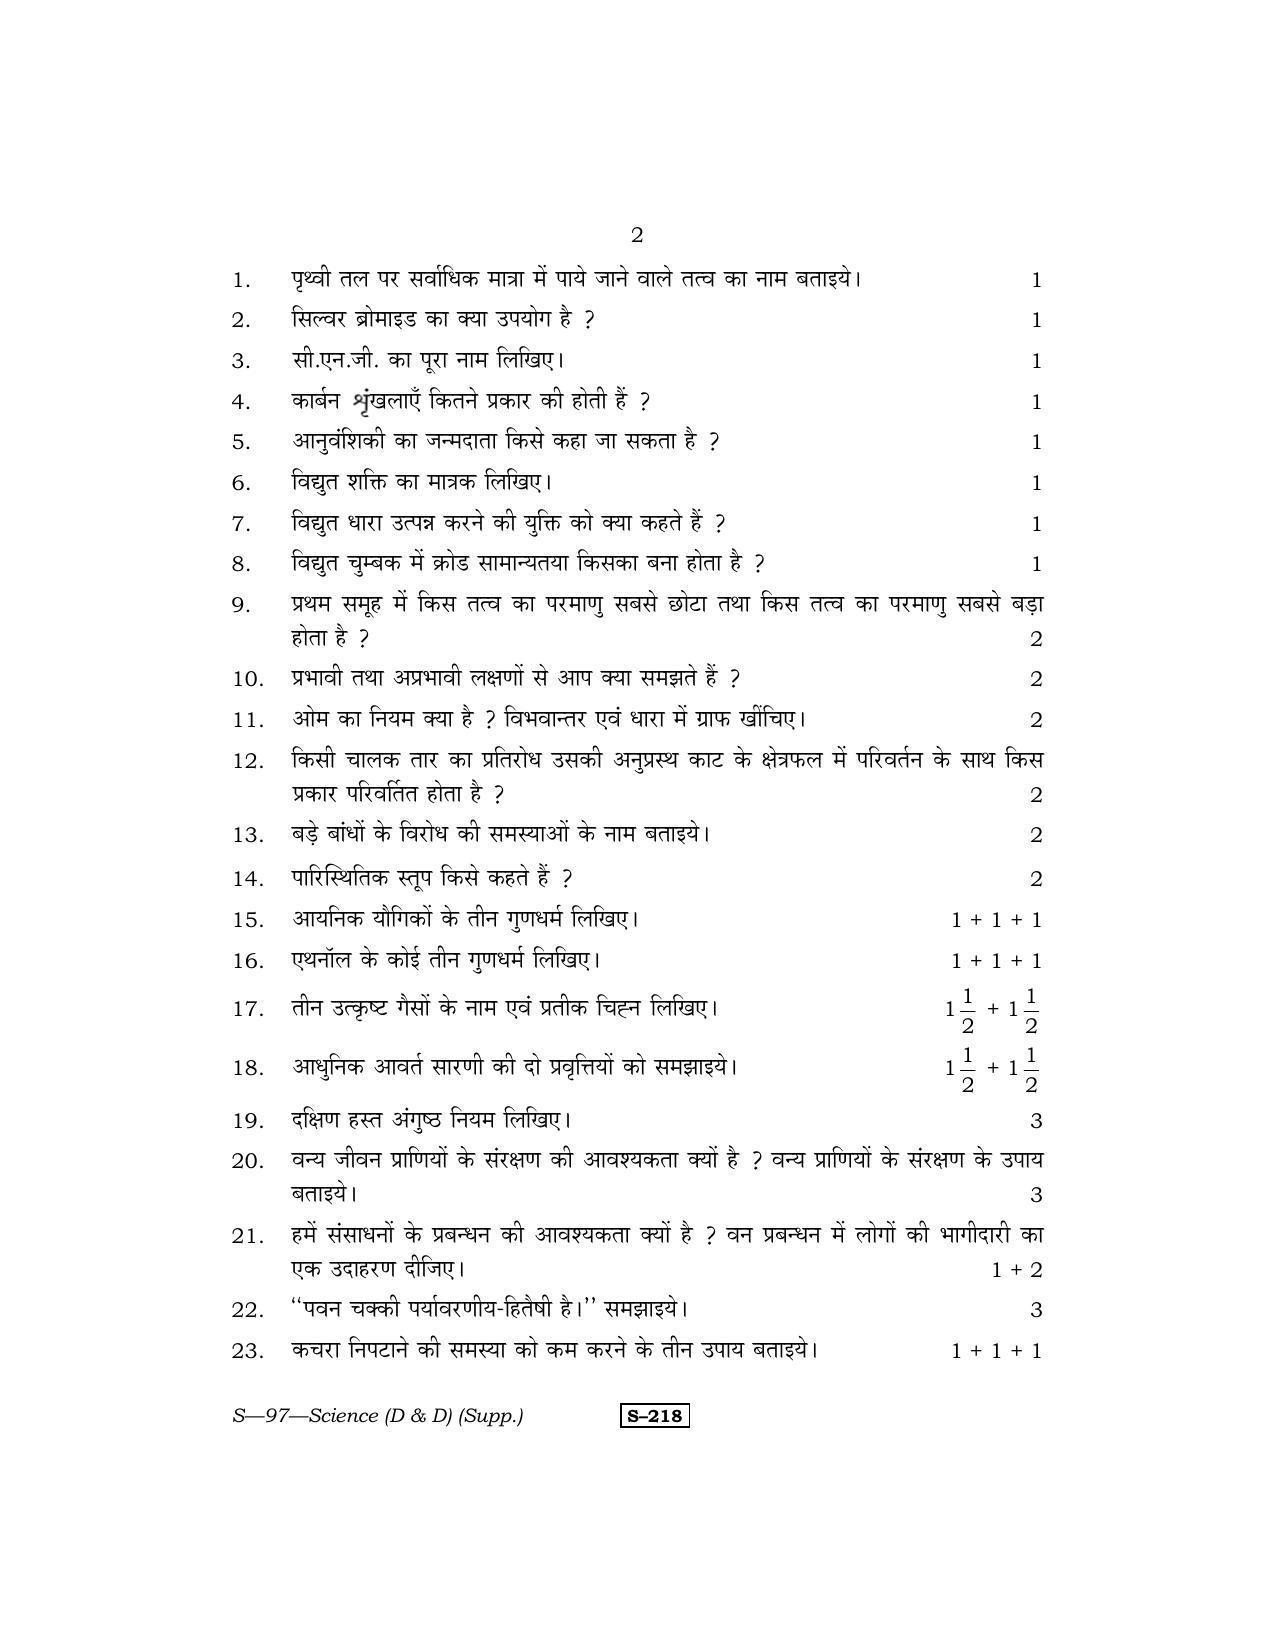 RBSE Class 10 Science (D & D) (Supp.) 2013 Question Paper - Page 2